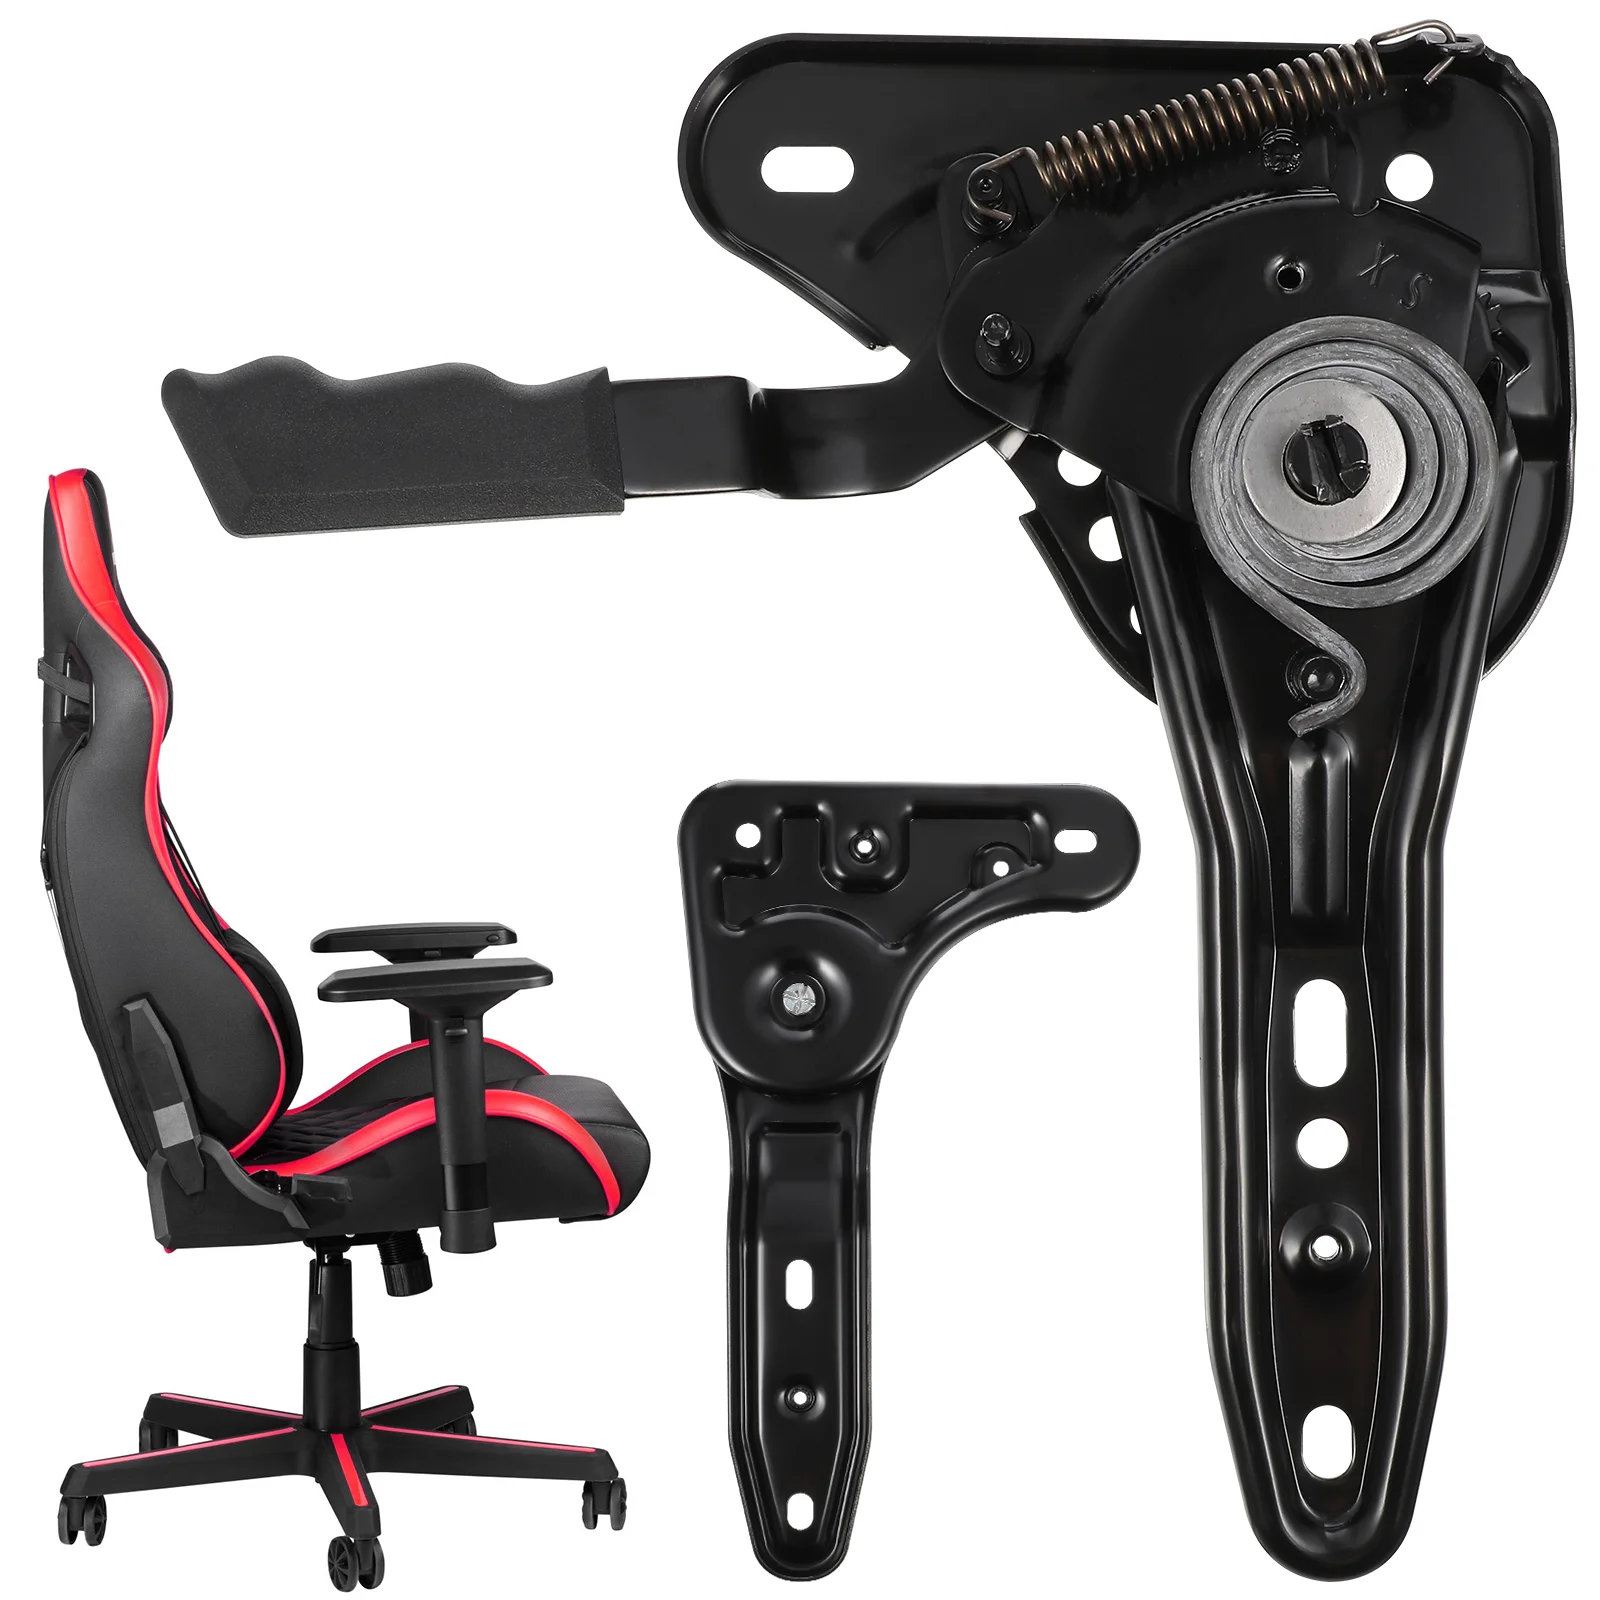 Angle Adjuster Chair Angle Adjuster Gaming Chair Tuner Angle Adjuster Tool Chair Accessory Backrest Tilt adjustment mechanism 1 set 3d invisibility nose up lifting shaper clip no pain beauty tool pad nose curler tuner minifit trainers belleza nariz